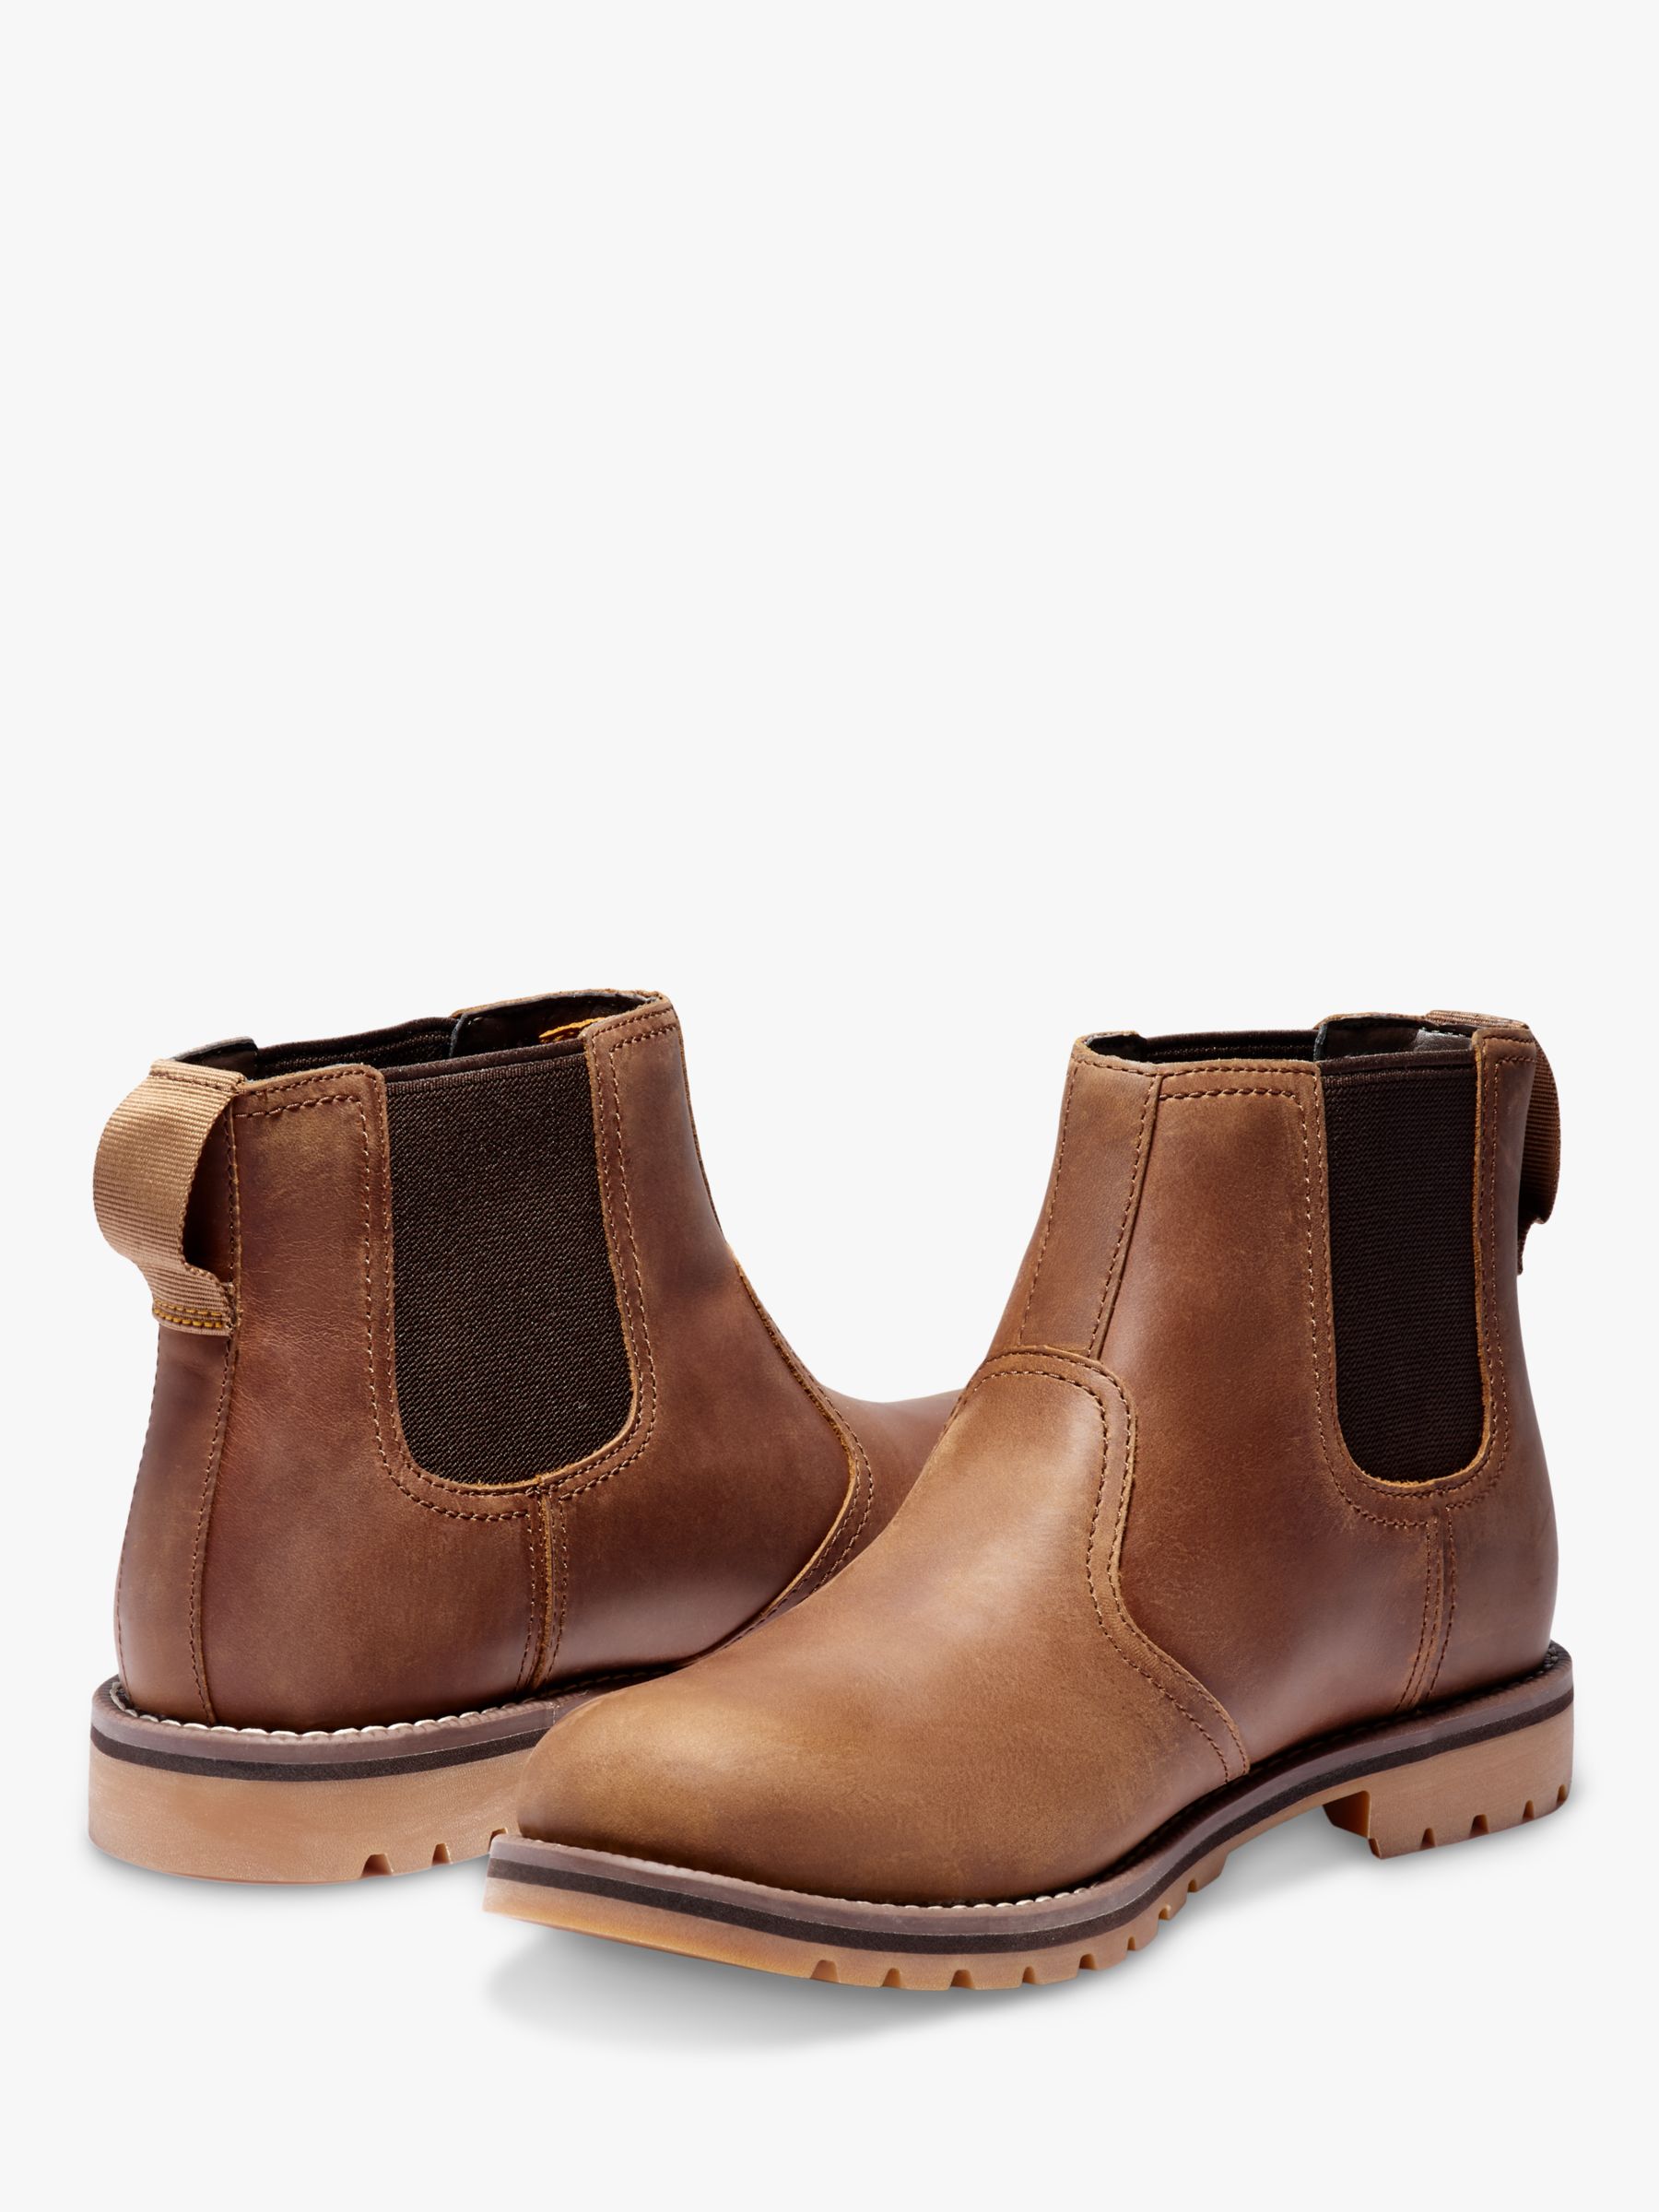 Buy Timberland Larchmont Leather Chelsea Boots, Rust Online at johnlewis.com